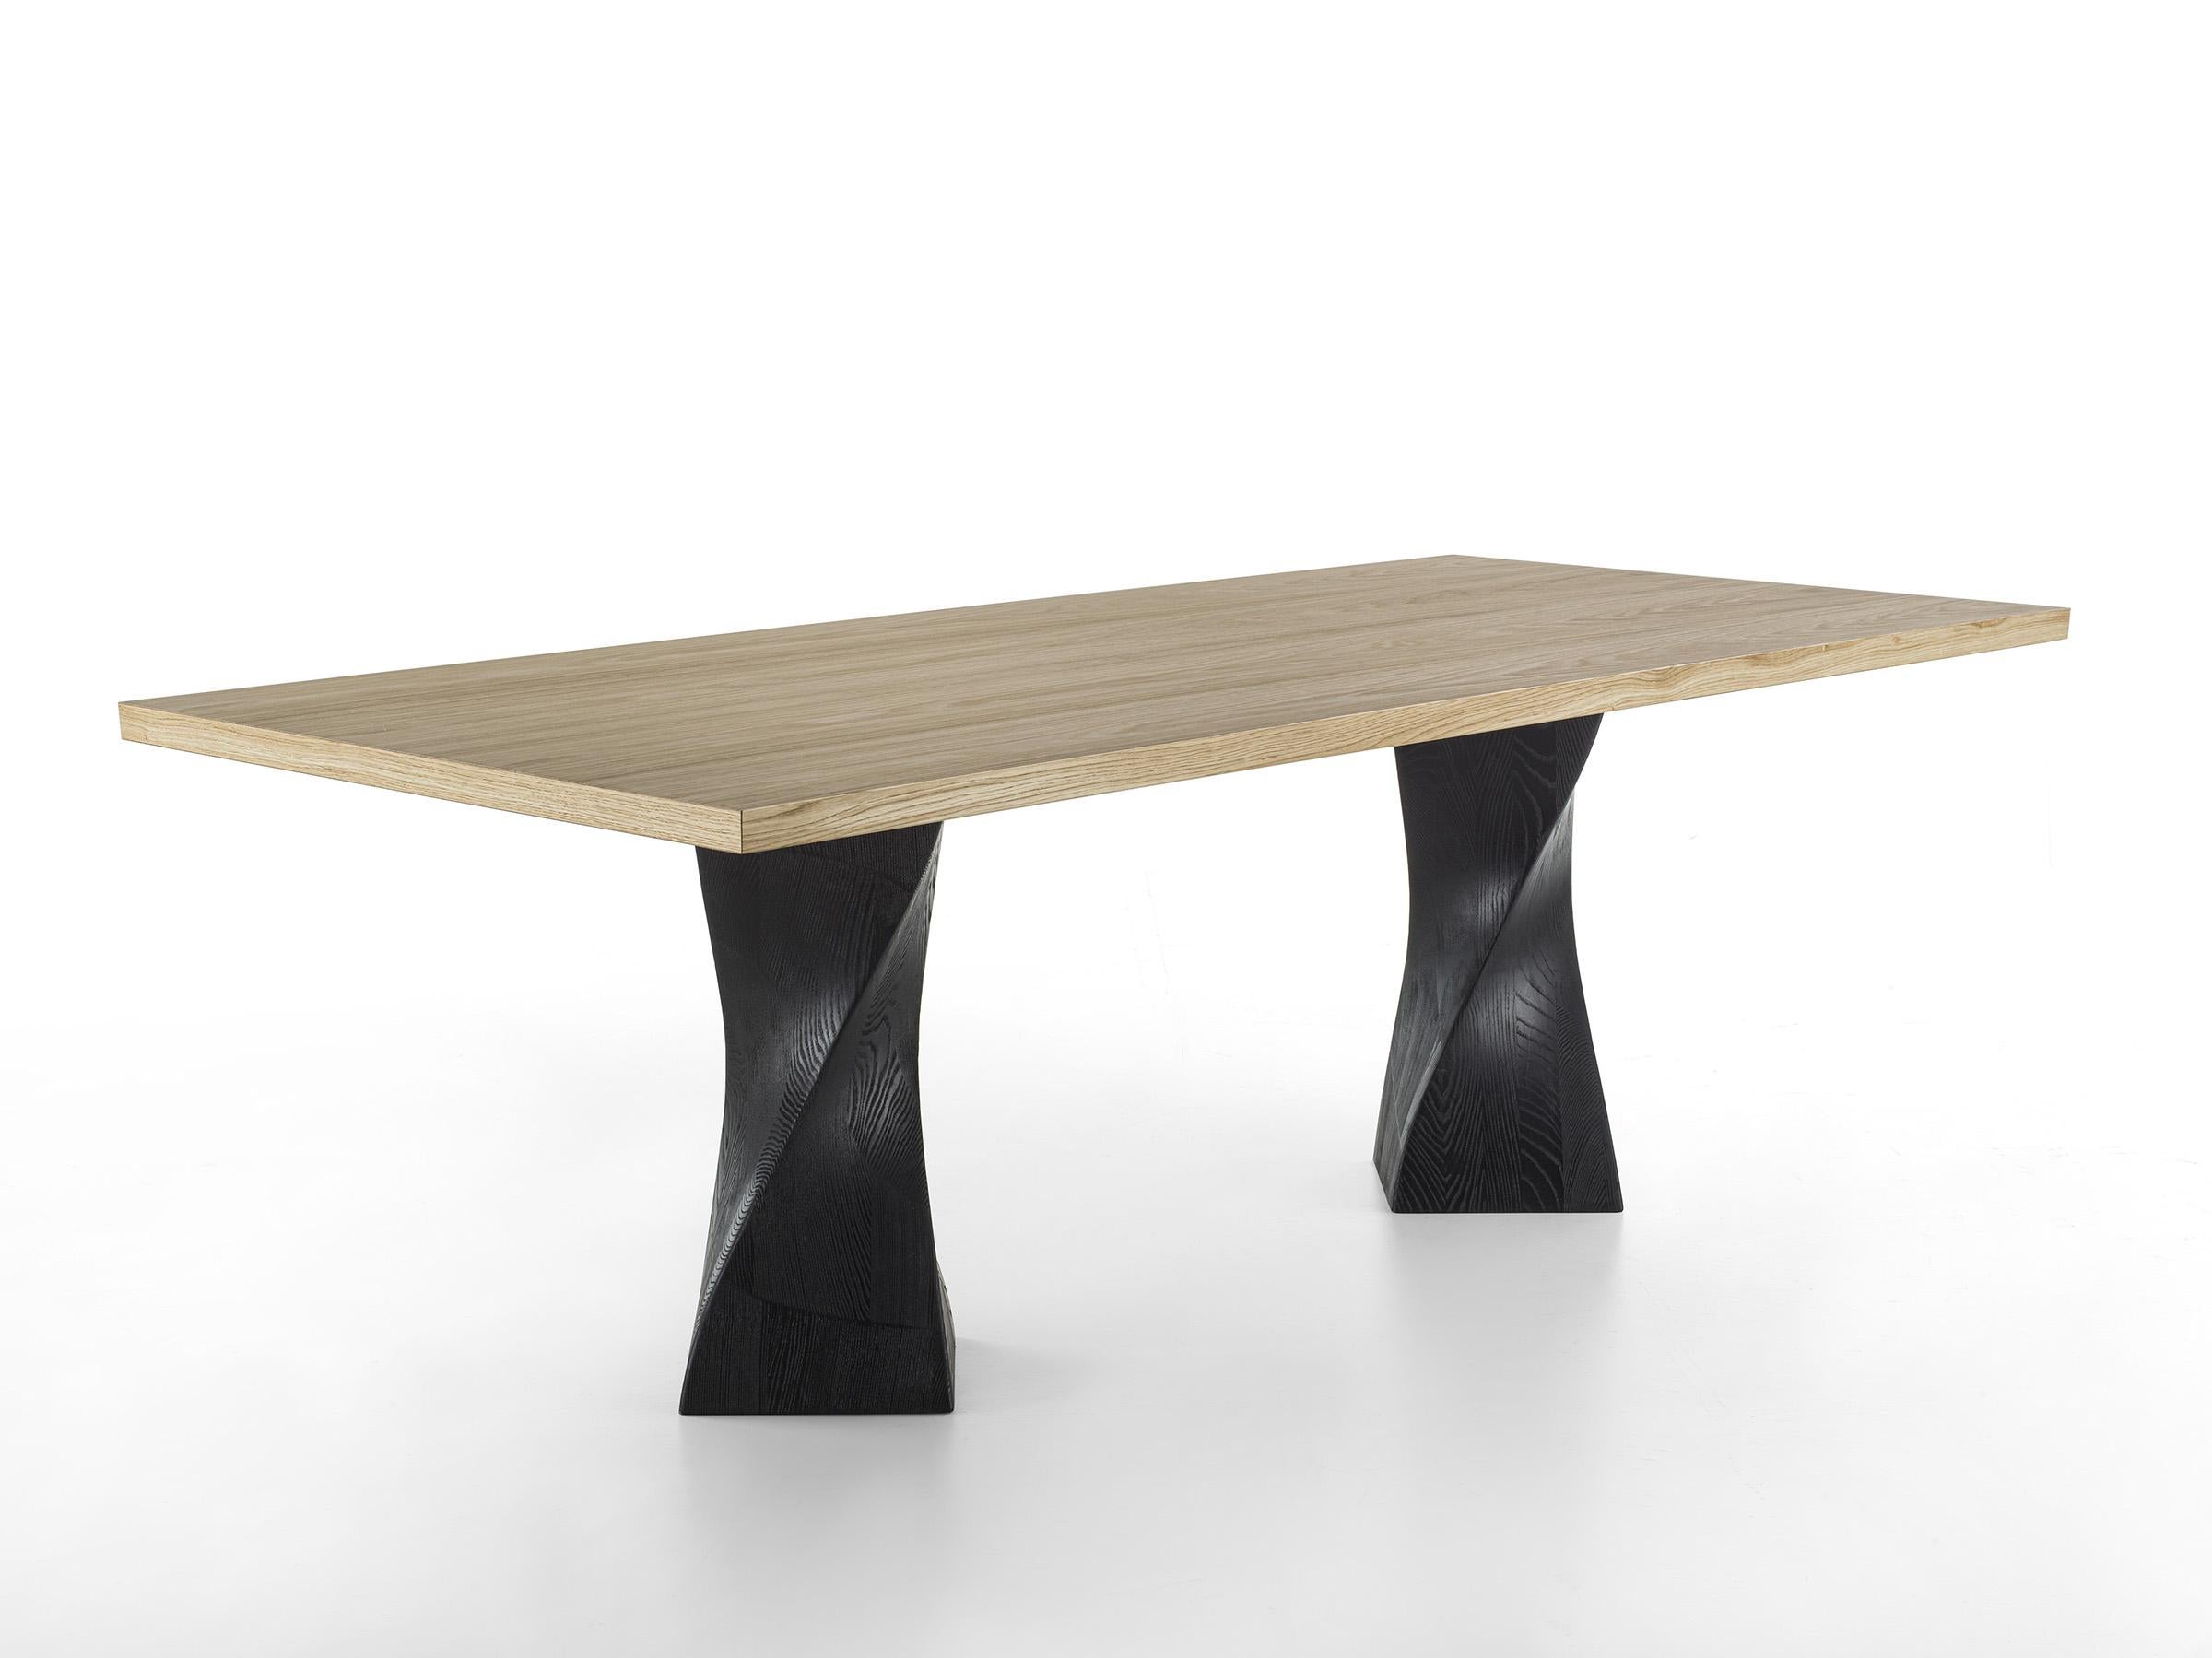 Simple Twist Wood Table, Designed by Studio Excalibur, Made in Italy For Sale 2